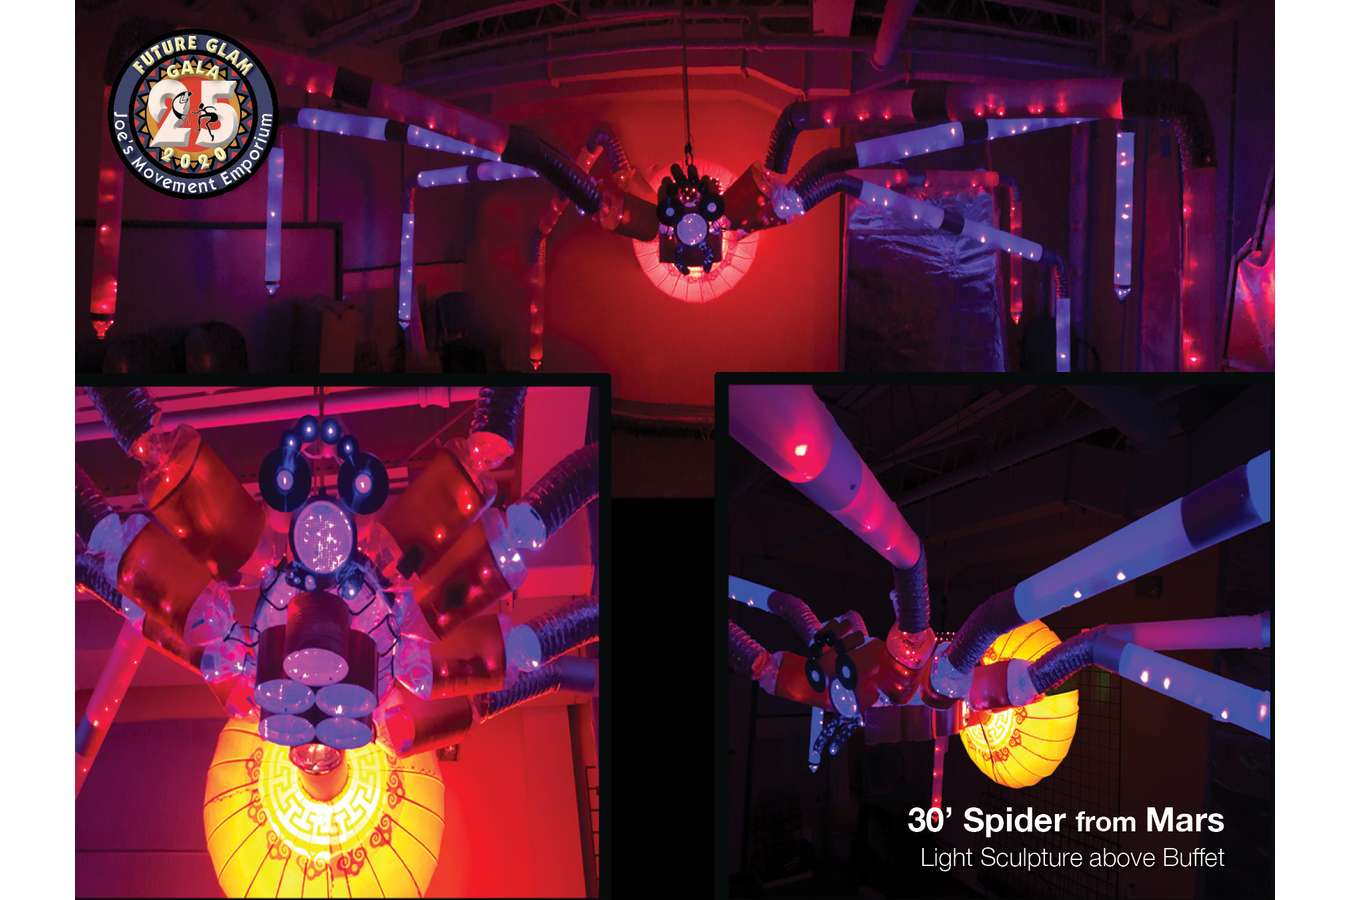 2I J-Glam : Inspired by Ziggy Stardust & the Spider's from Mars tour, this giant chandelier hovers over the space age buffet. Delicacies being served included:  Major Tom's Tzatiki, Space Cowboy Caviar, Arachnoid Angles, Klingon Wings, Saturn Rings, Binary Bites, Vegan Veggies, and Tribble Nibbles.